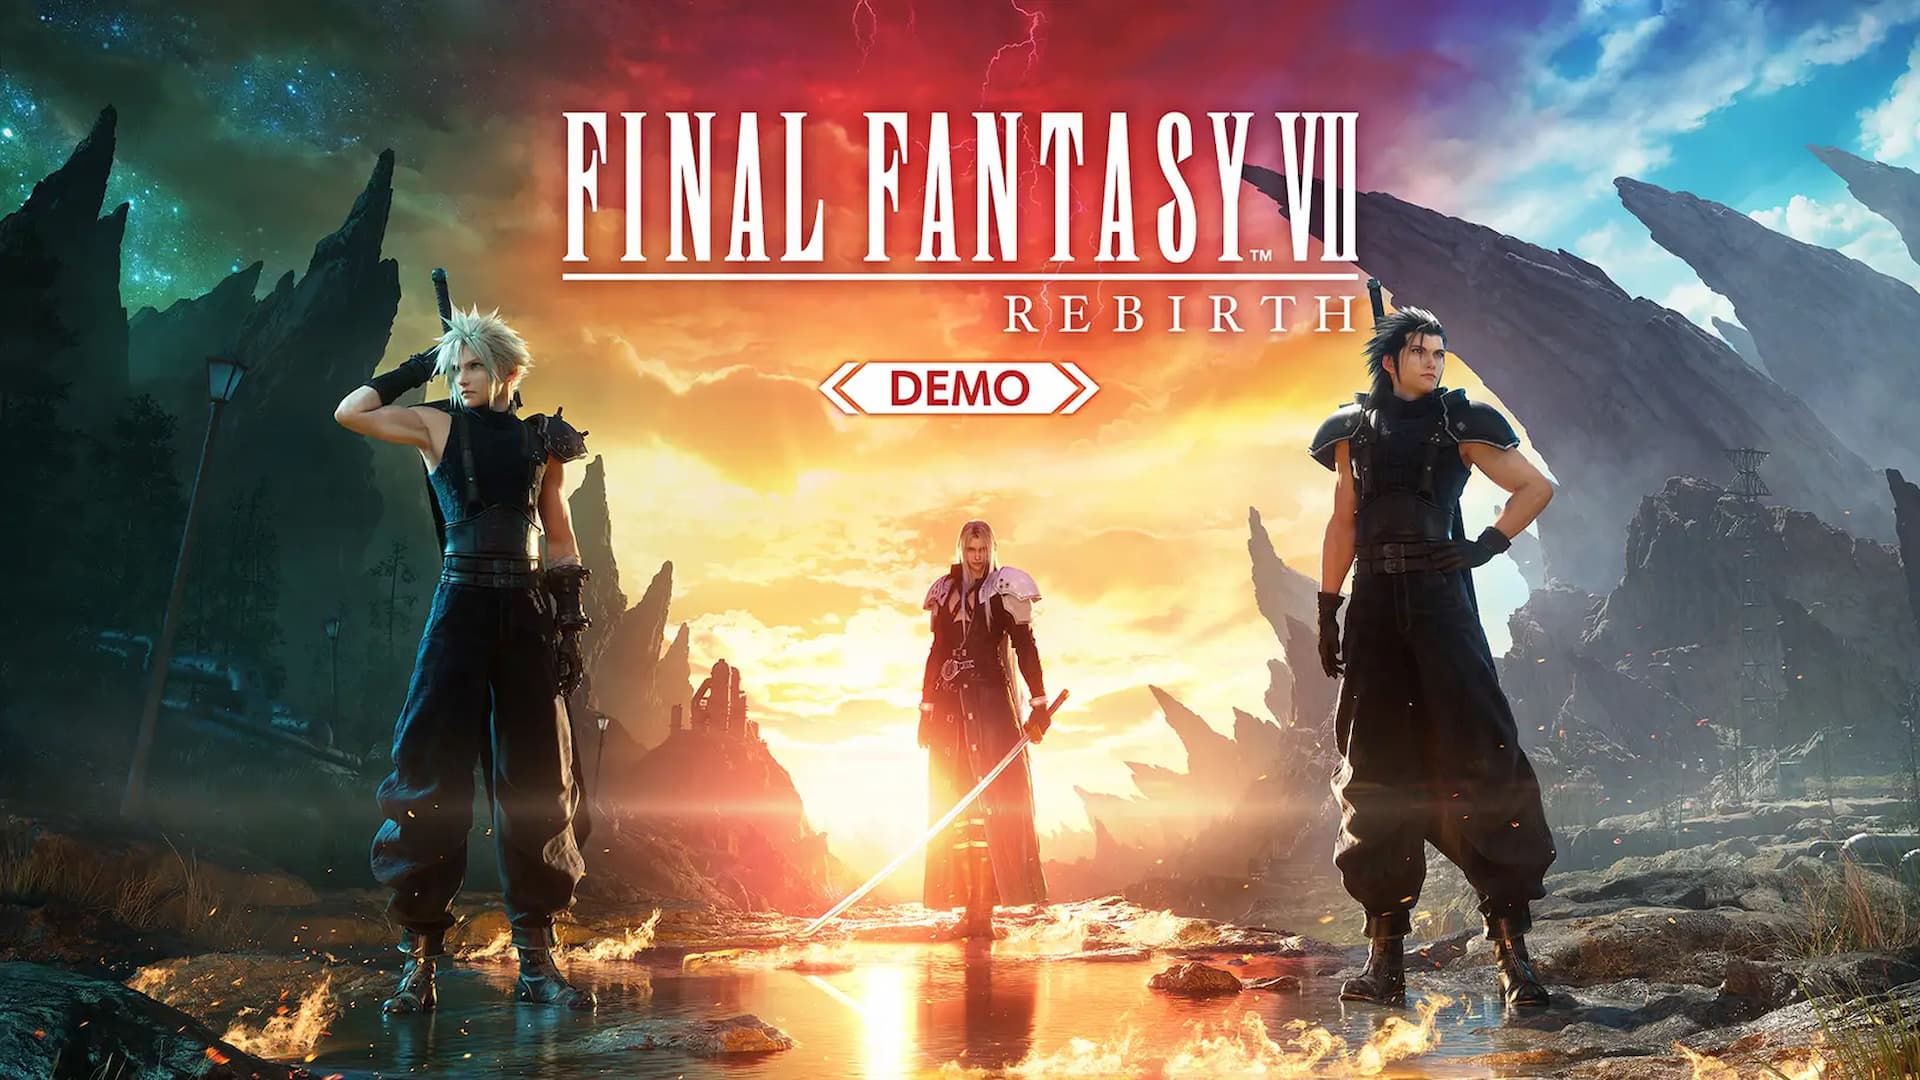 Final Fantasy 7 Rebirth demo released on PS5 following State of Play cover image